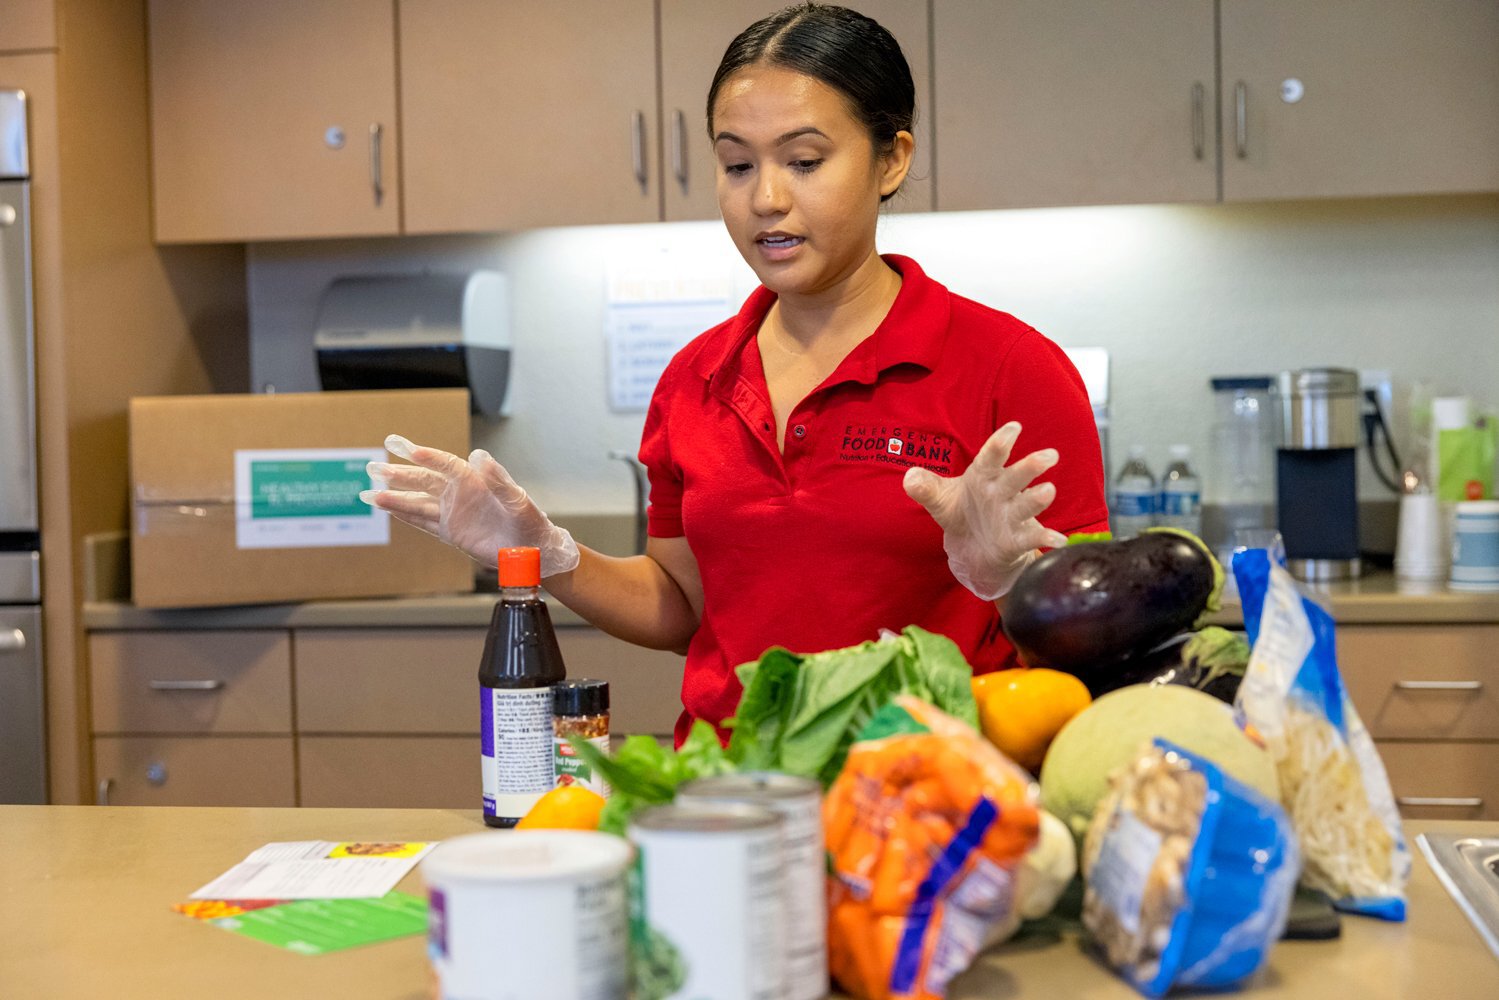 Alex Marapao leads a cooking class that is streamed to participants in the Healthy Food Rx program.